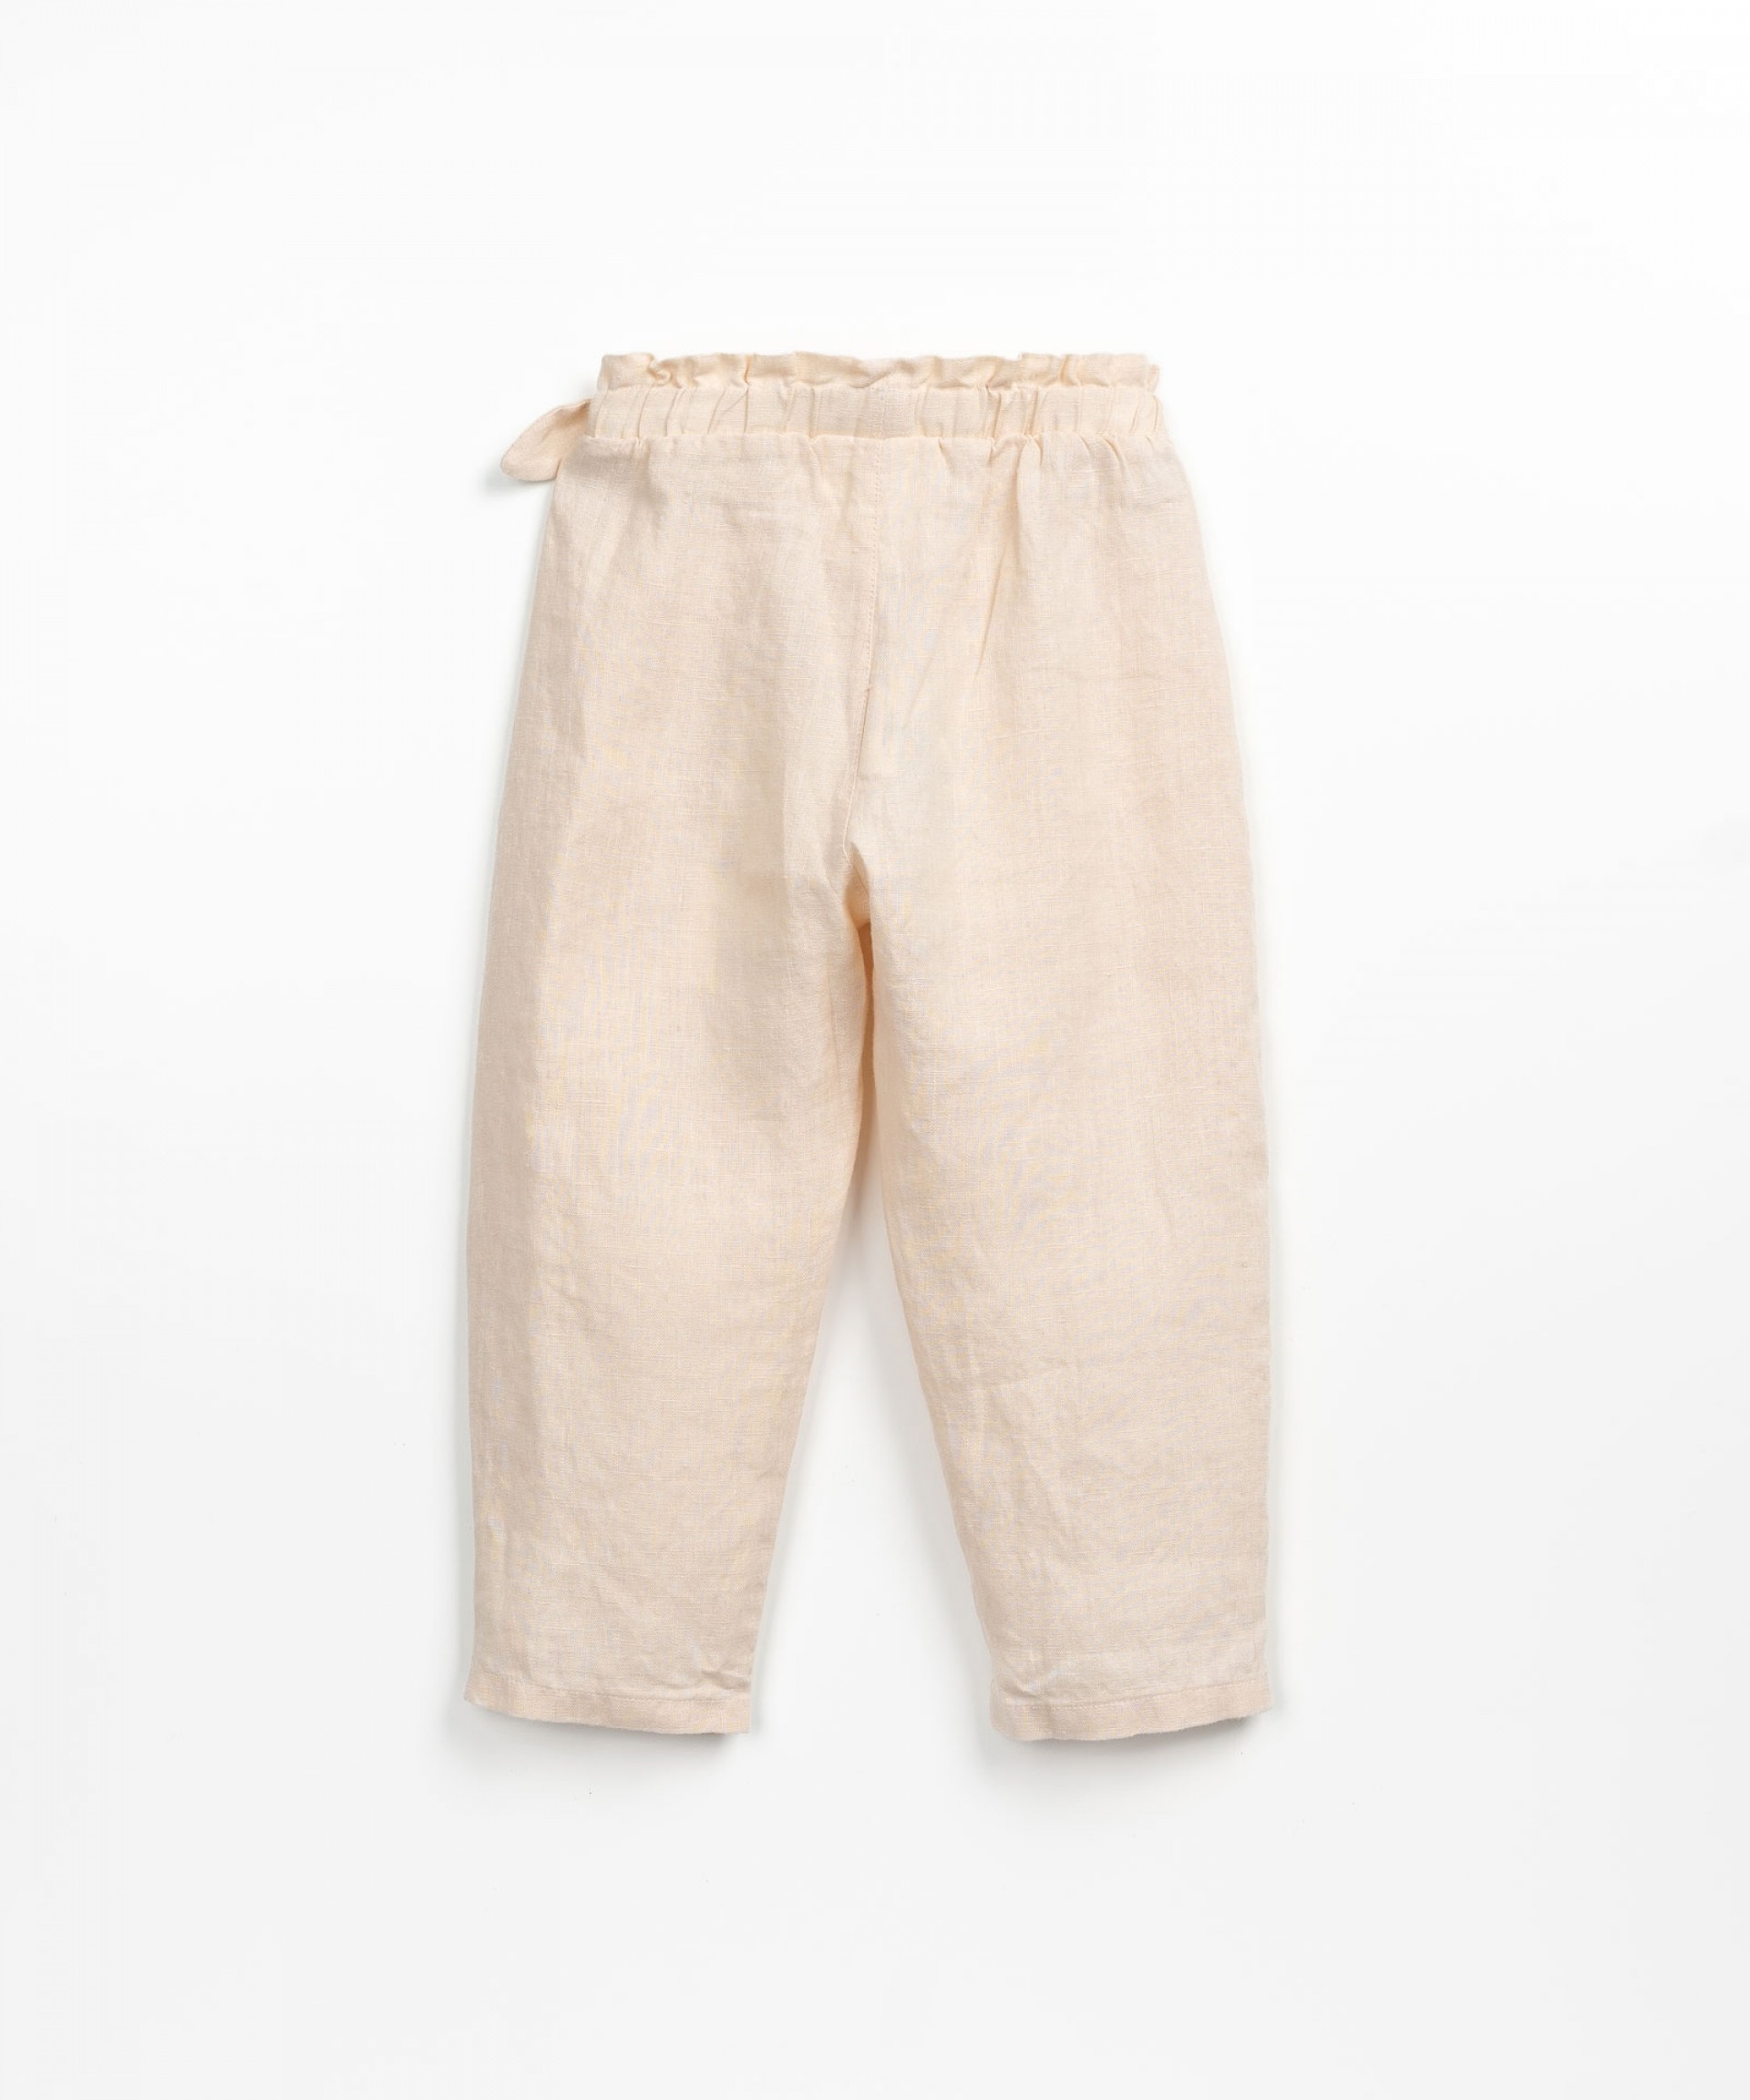 Linen trousers with double-layered detail | Textile Art